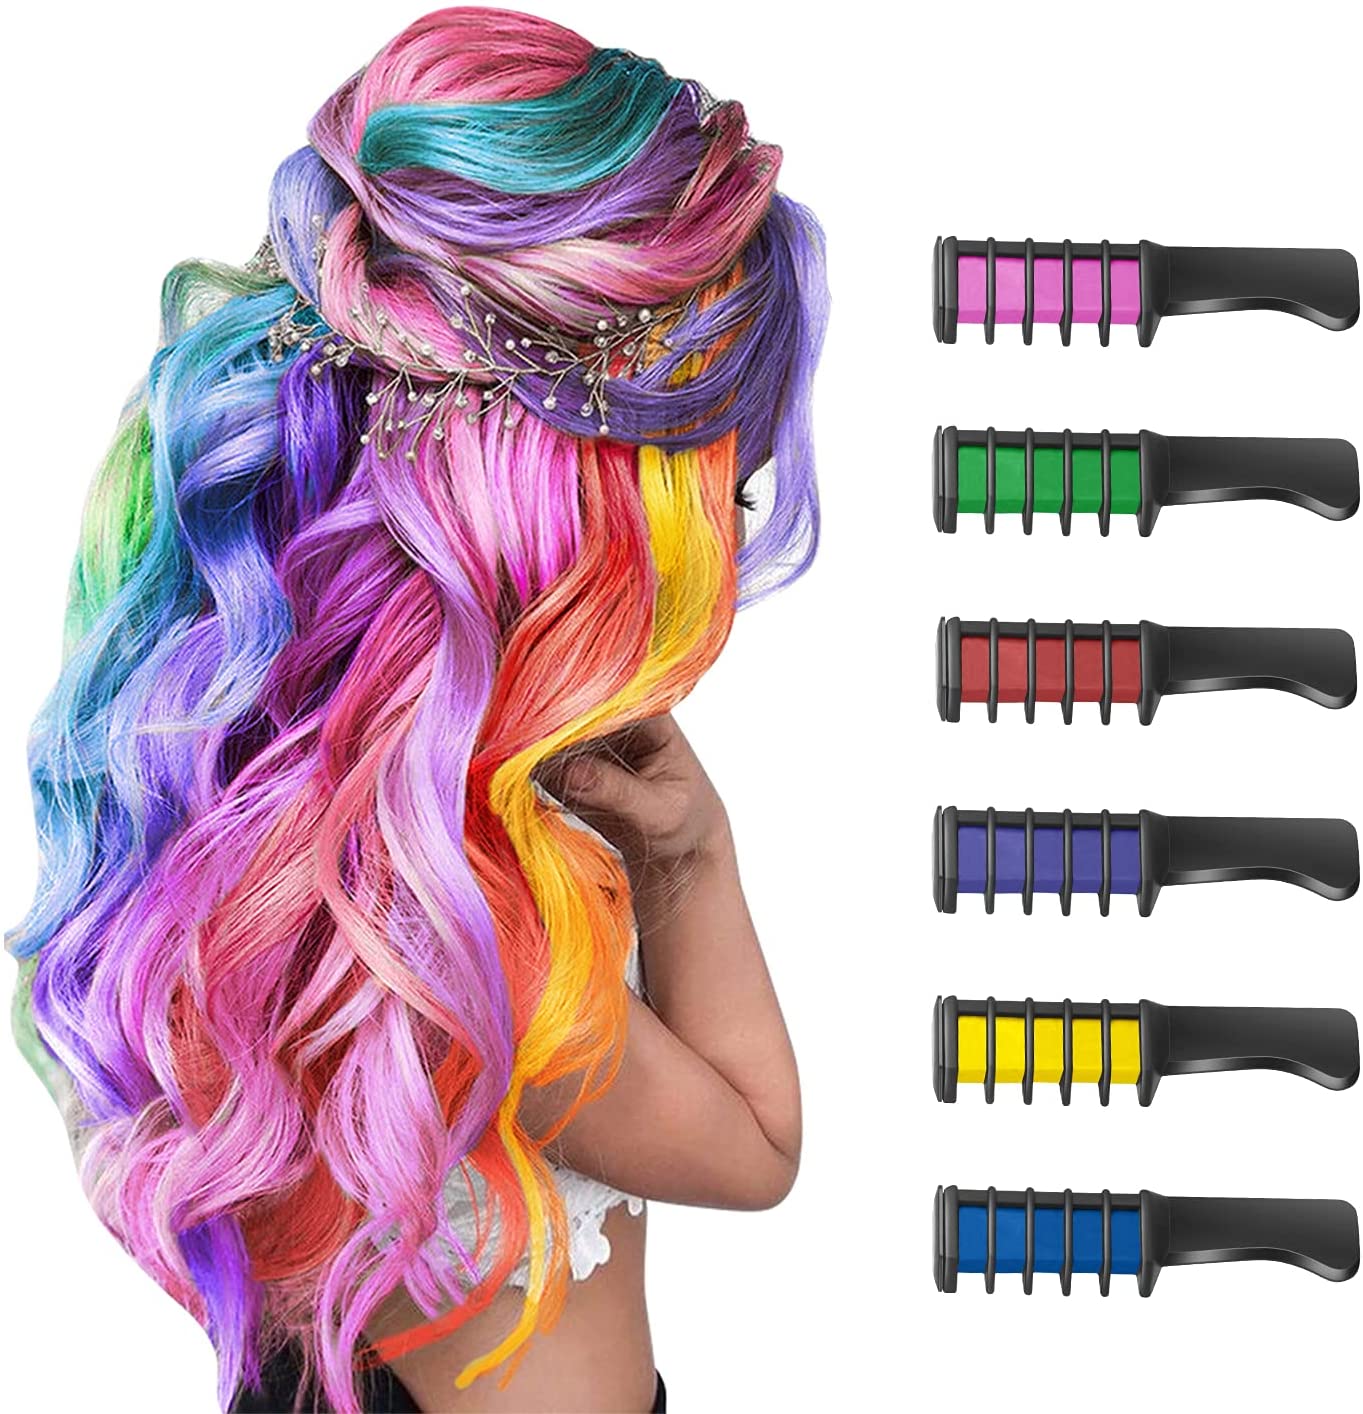 Hair Color Dye Comb Set Make Up Toys for Girls New Year Birthday Party